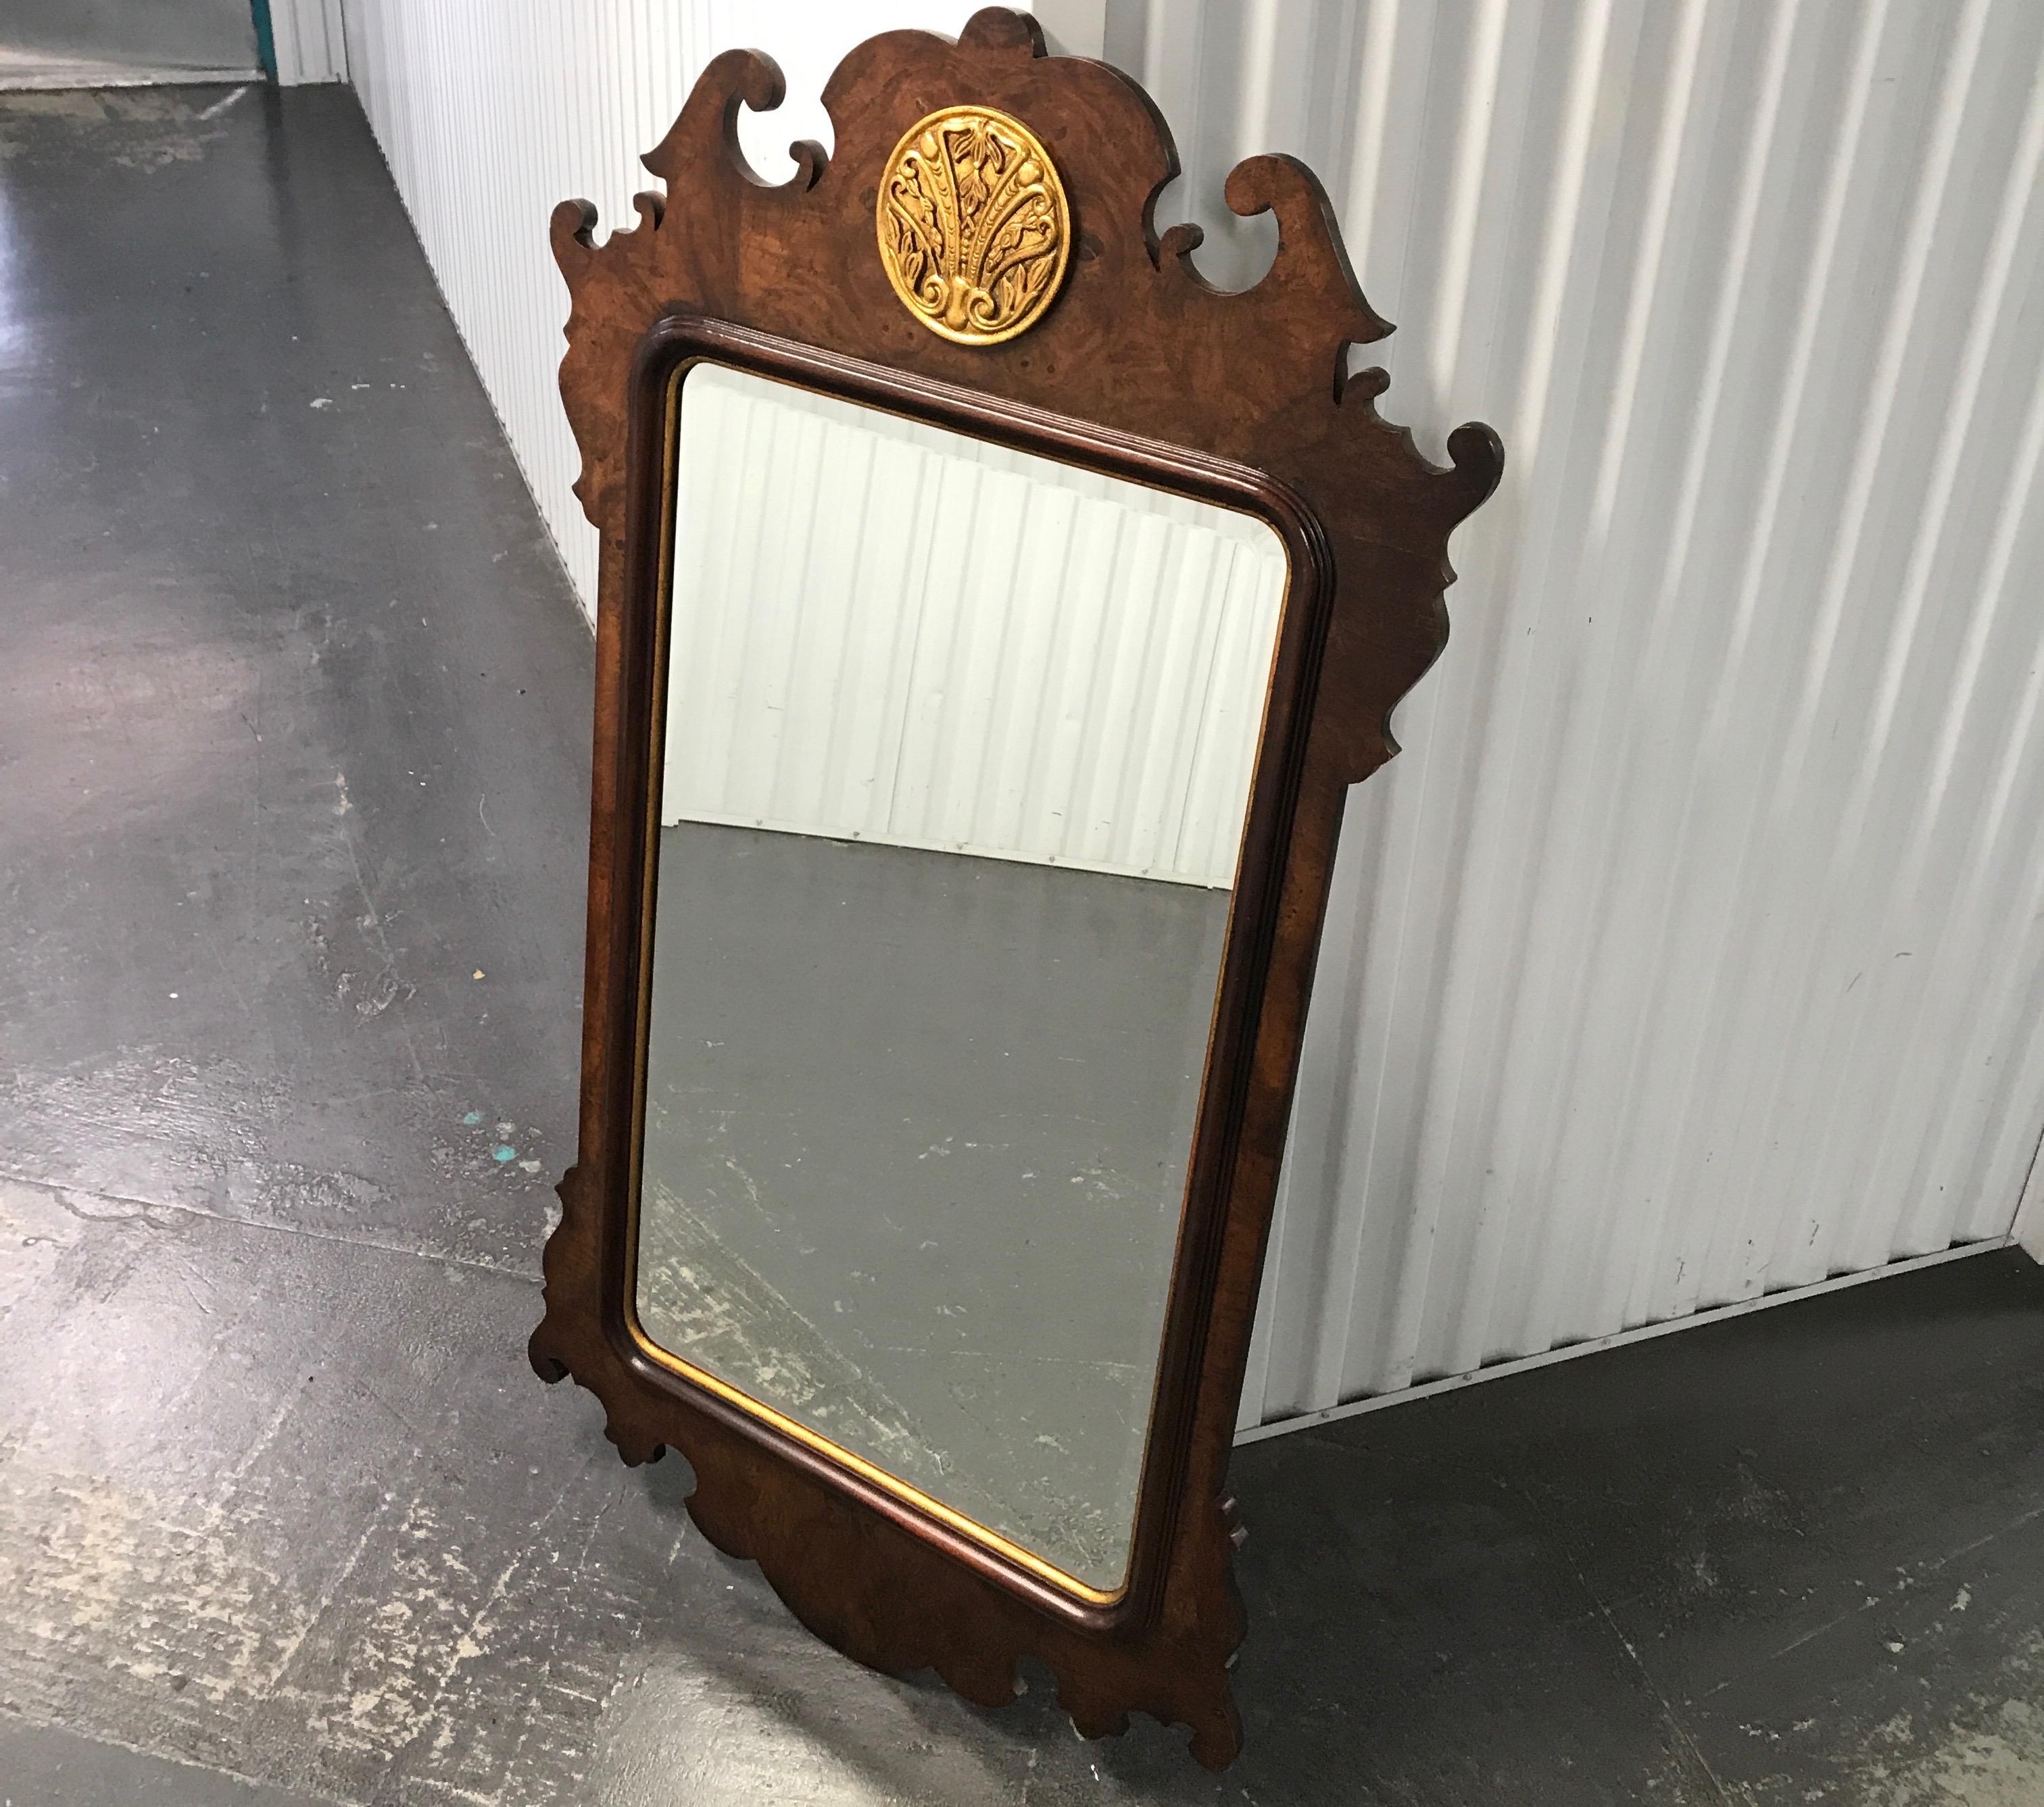 Lovely Chippendale style burlwood mirror adorned at top with gilded medallion.